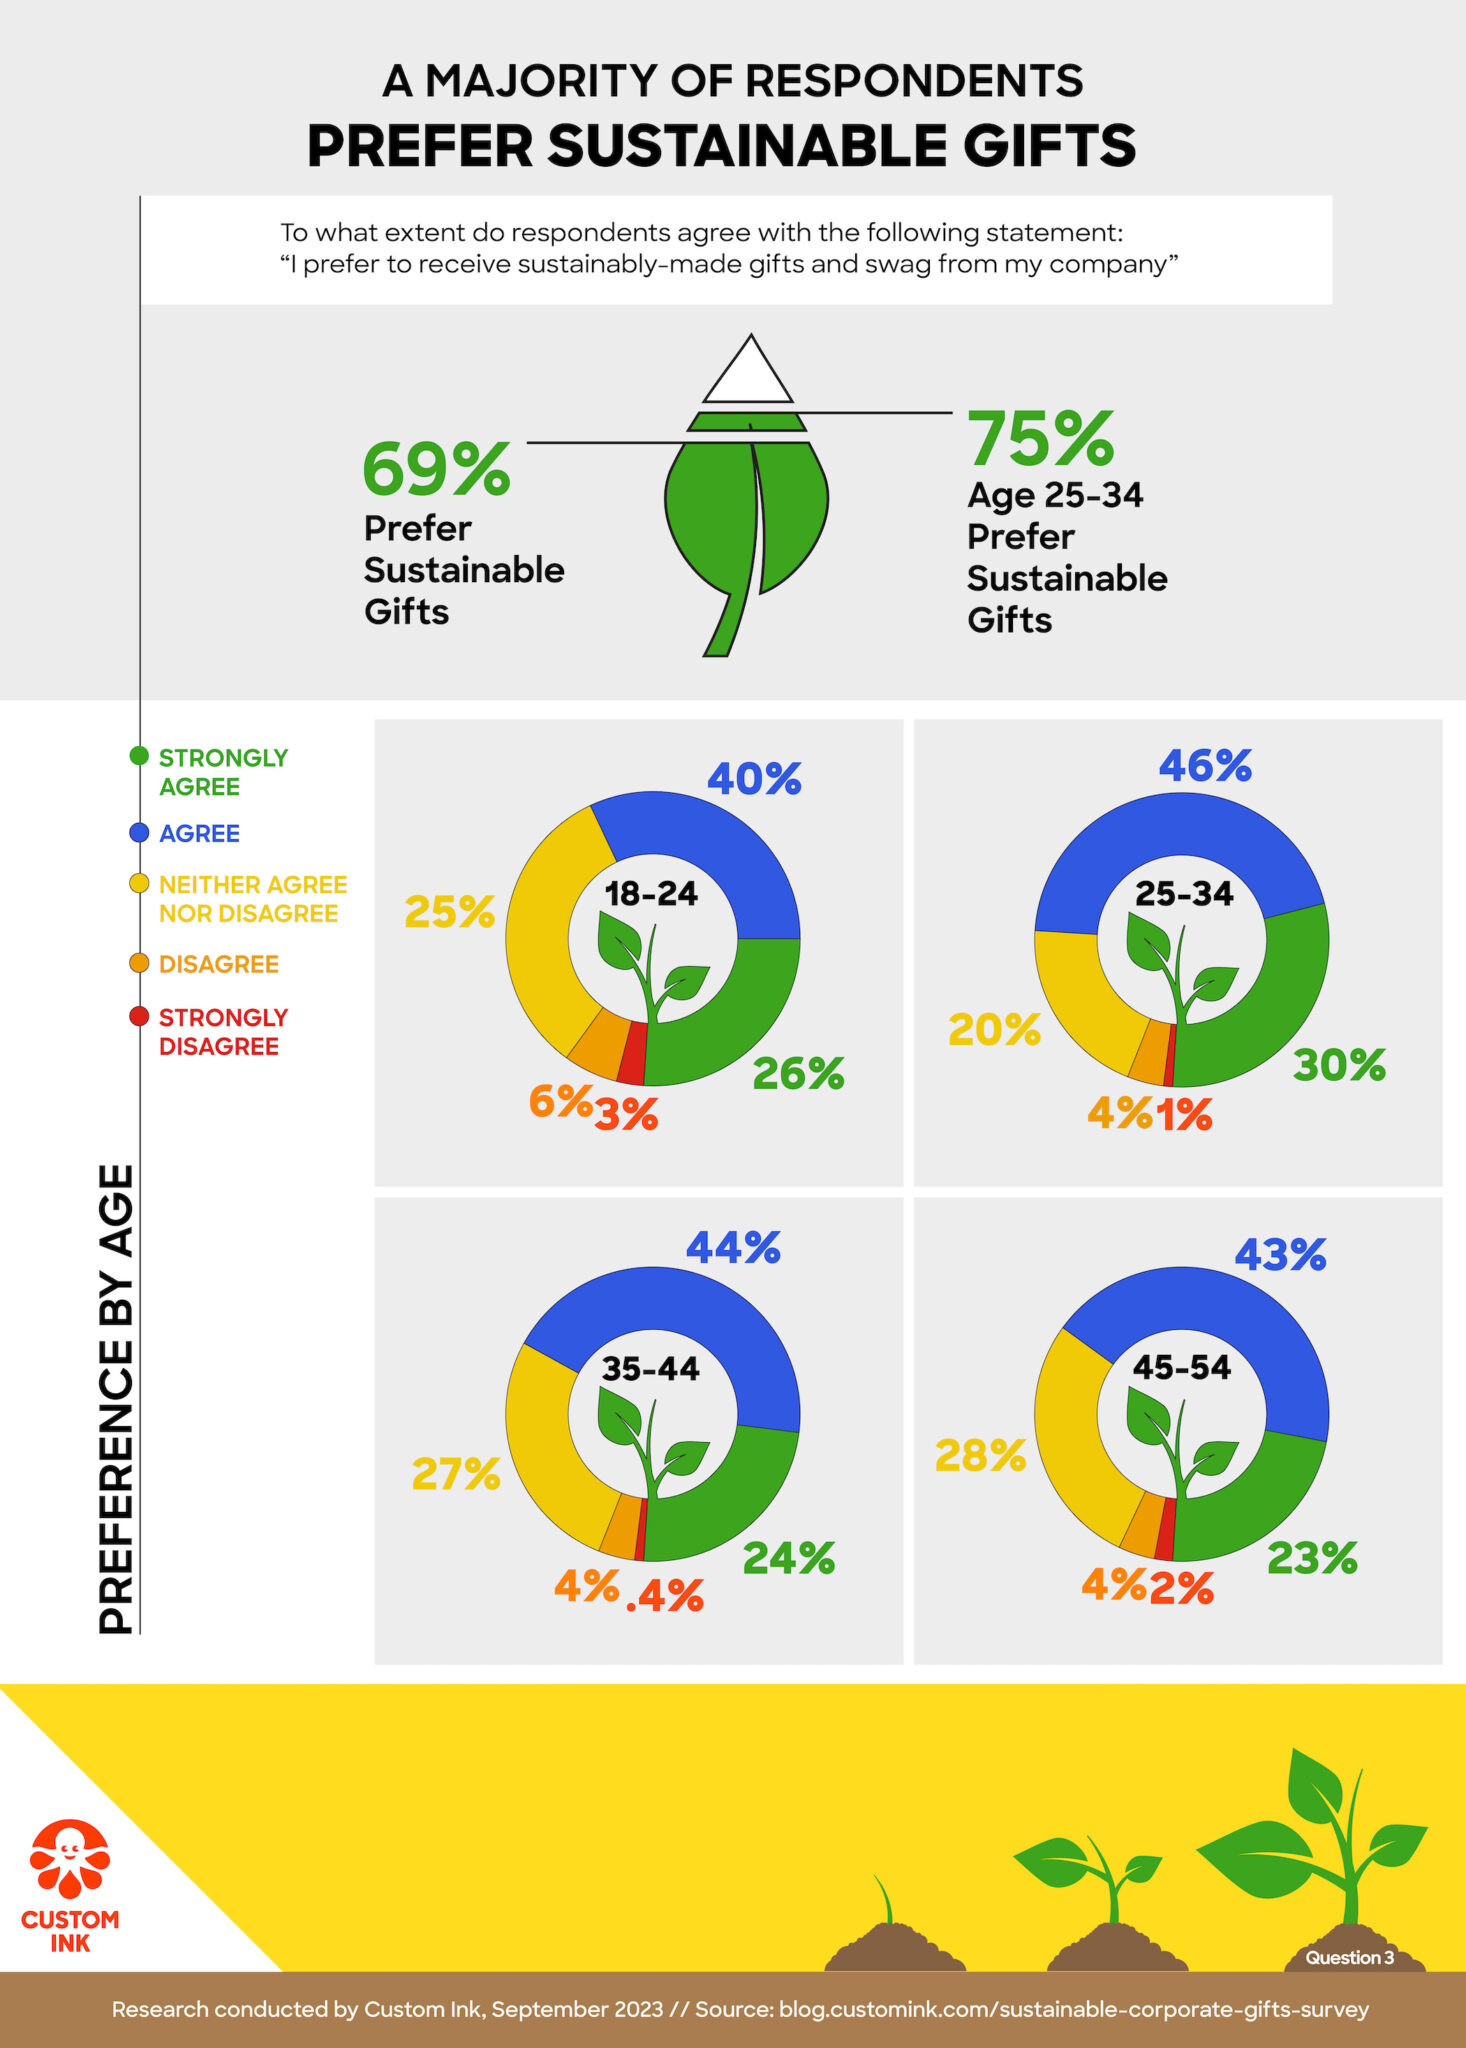 An infographic titled “A Majority of Respondents Prefer Sustainable Gifts” displays the survey question, “To what extent do respondents agree with the following statement: ‘I prefer to receive sustainably-made gifts and swag from my company.’” Beneath that is a chart in the shape of a leaf that shows 69% of respondents prefer sustainable gifts, and respondents aged 25-34 prefer sustainable gifts. At the bottom are four pie charts that show the breakdown of preferences by age: 18-24: Strongly Disagree (3%), Disagree (6%), Neither Agree nor Disagree (25%), Agree (40%), Strongly Agree (26%) 25-34: Strongly Disagree (1%), Disagree (4%), Neither Agree nor Disagree (20%), Agree (46%), Strongly Agree (30%) 35-44: Strongly Disagree (.4%), Disagree (4%), Neither Agree nor Disagree (27%), Agree (44%), Strongly Agree (24%) 45-54: Strongly Disagree (2%), Disagree (4%), Neither Agree nor Disagree (28%), Agree (43%), Strongly Agree (23%) 